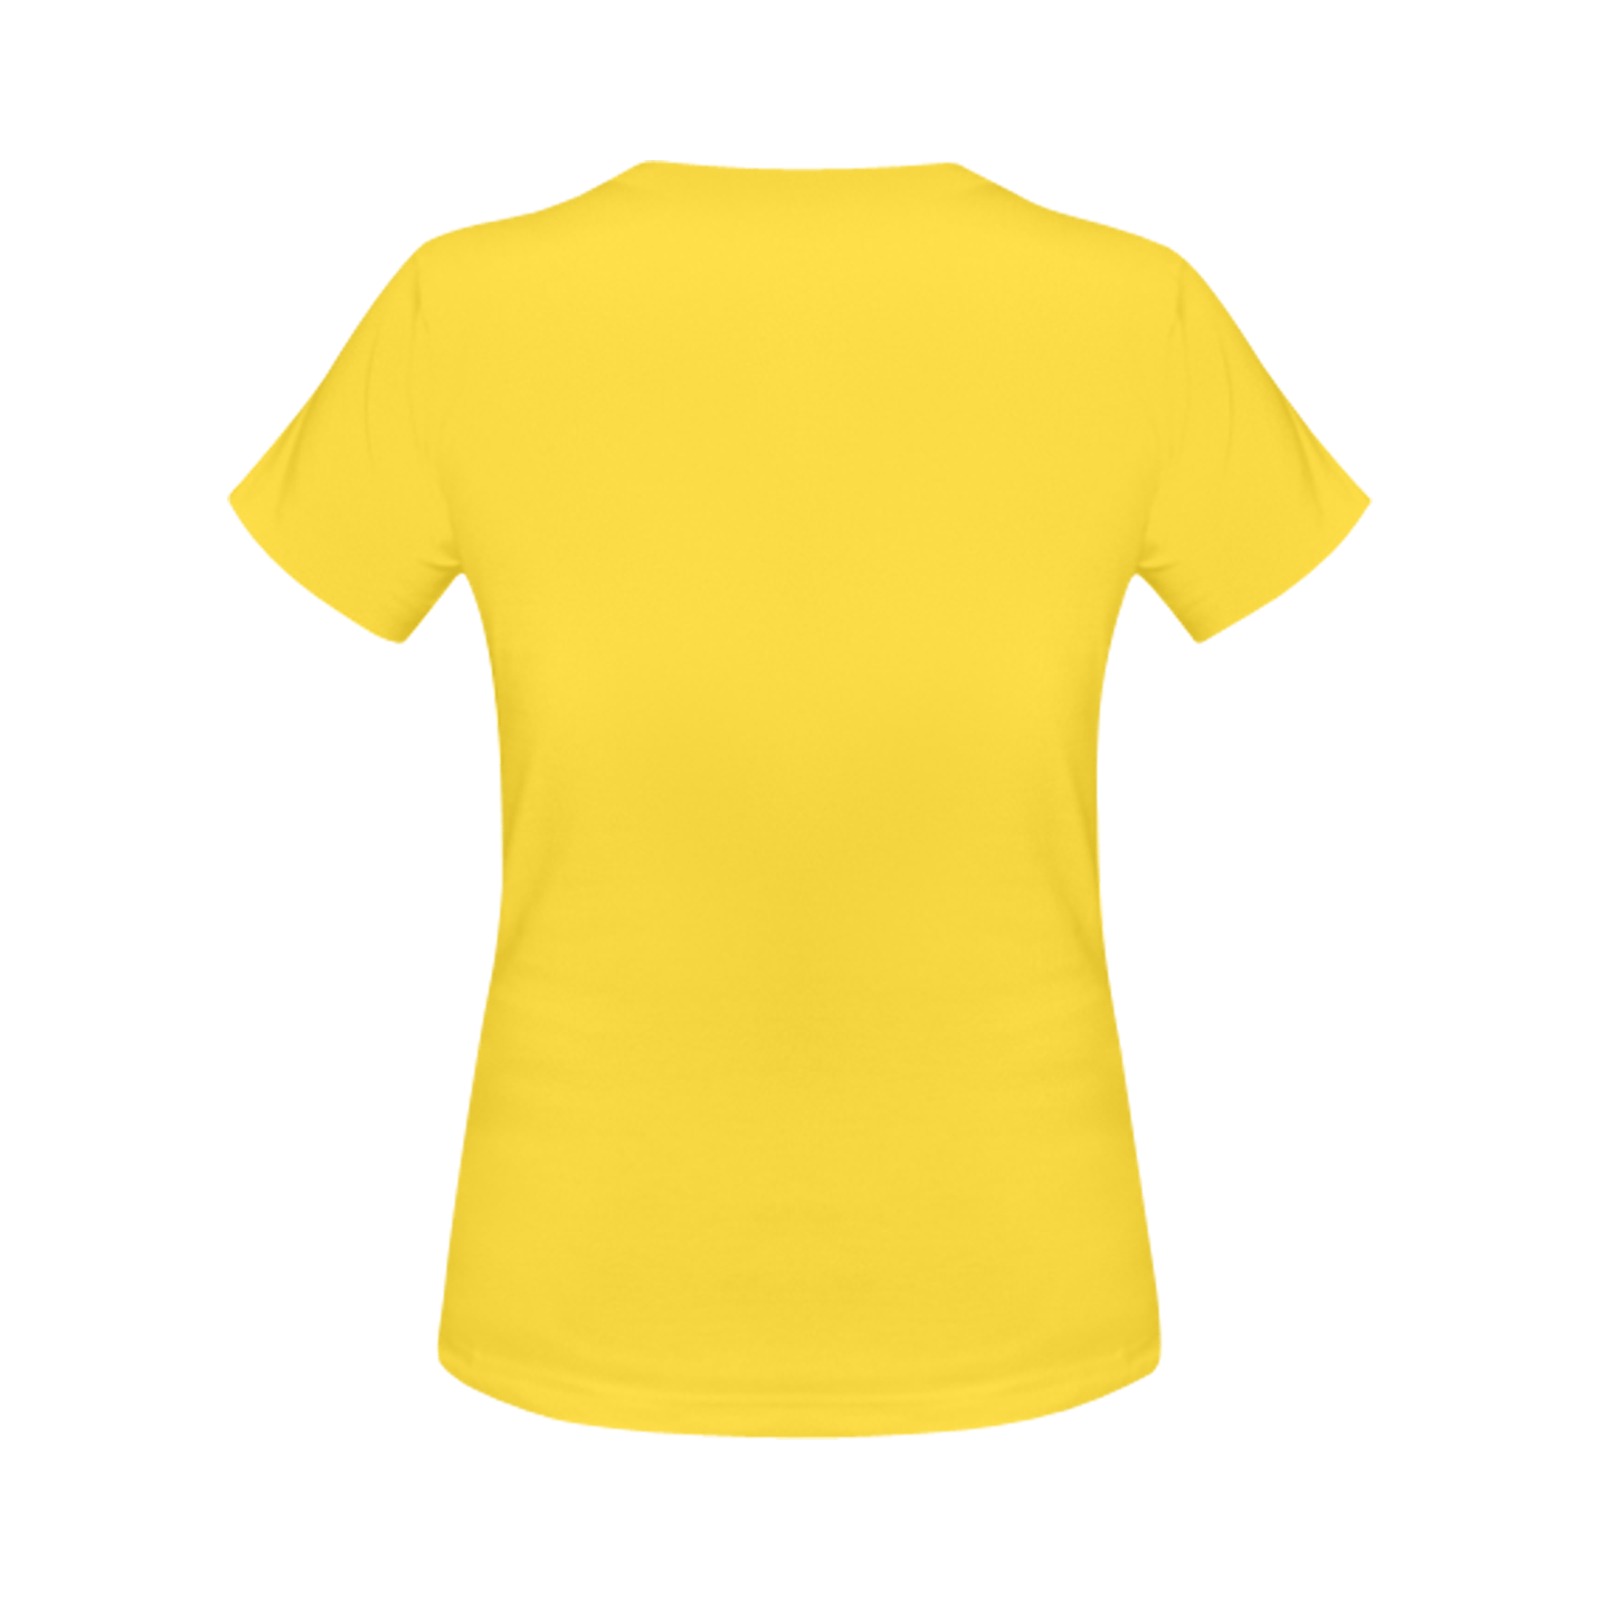 Overcome (Wh text) T-Shirt Yellow Bird Women Women's T-Shirt in USA Size (Front Printing Only)